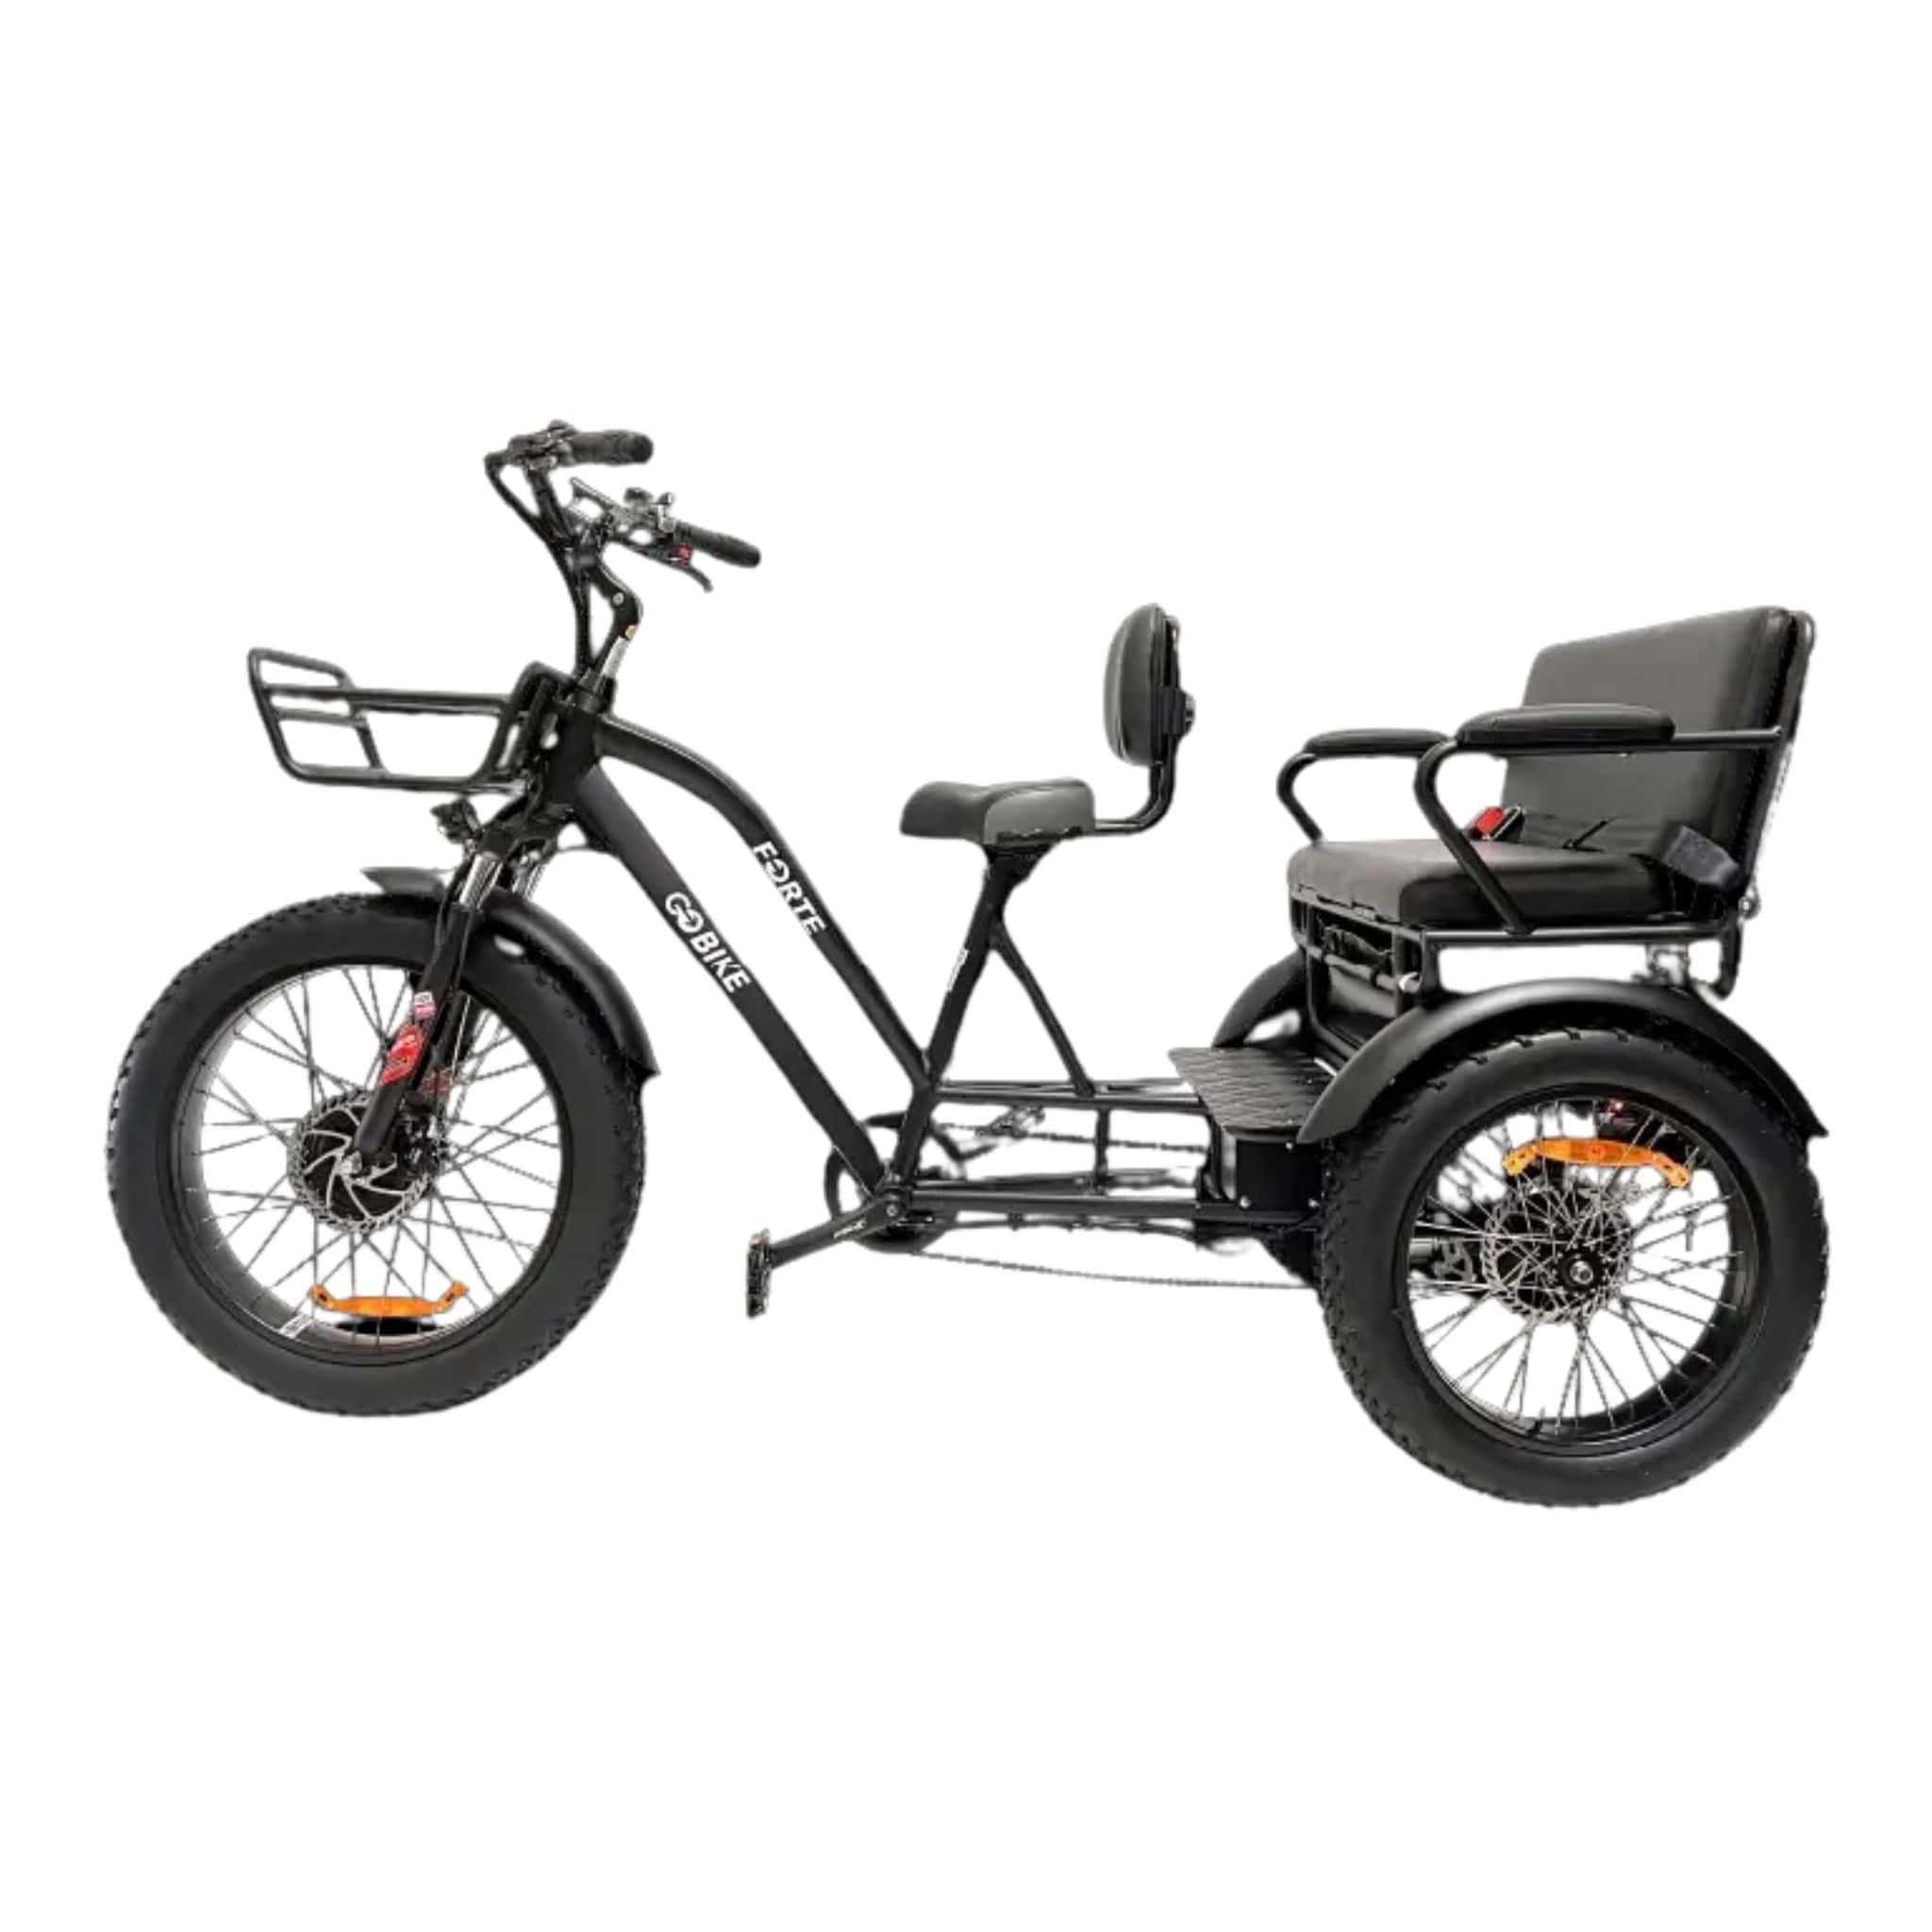 GOBike-FORTE with rear seat